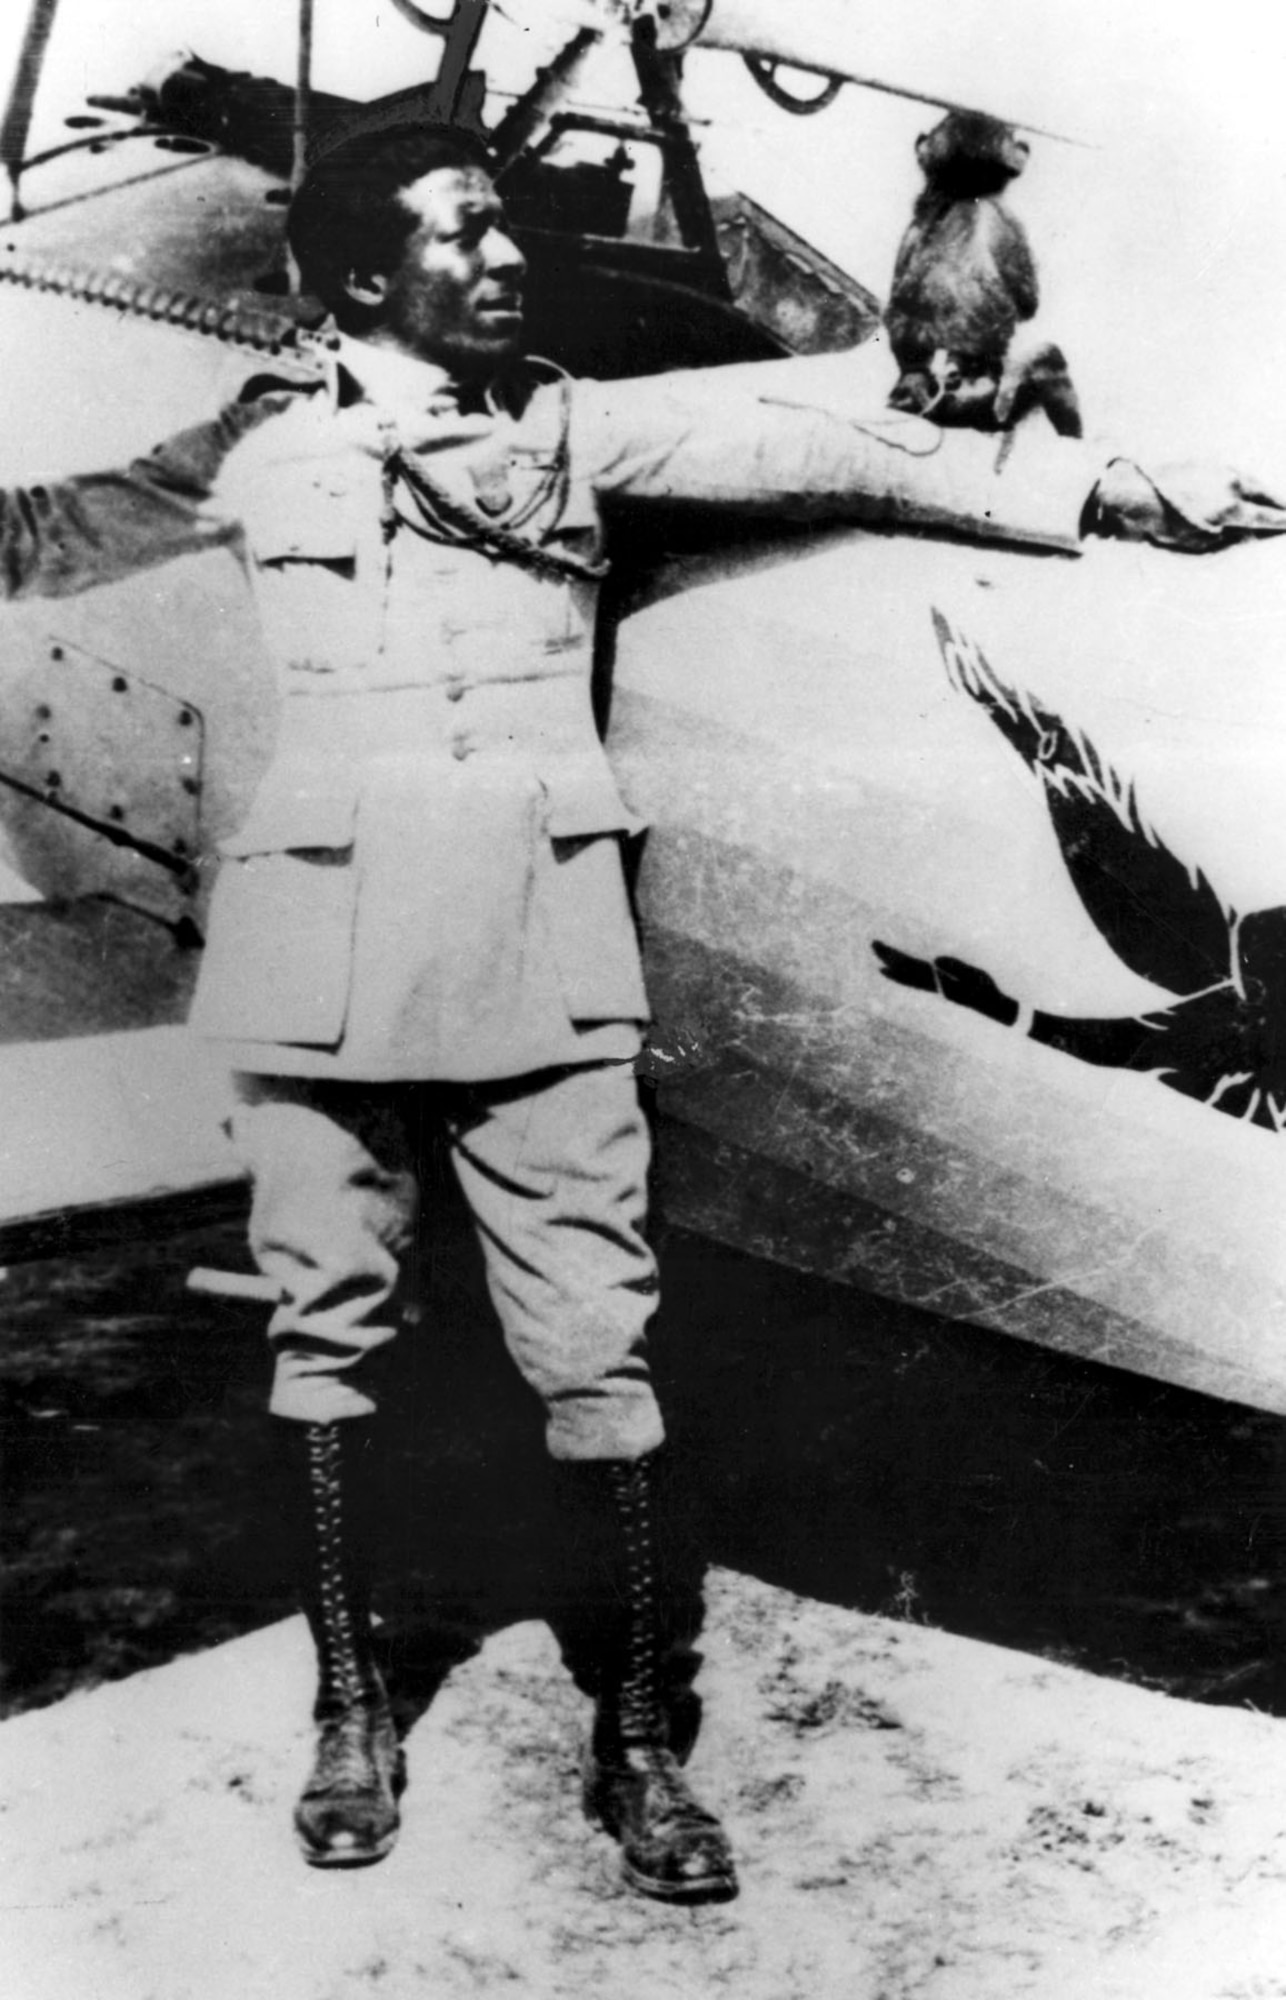 Eugene Bullard with his pet monkey “Jimmy” beside a Nieuport 24 fighter of the 93rd Squadron (Escadrille) in August or September 1917. He flew with Jimmy tucked inside his coat on every combat mission. (U.S. Air Force photo)